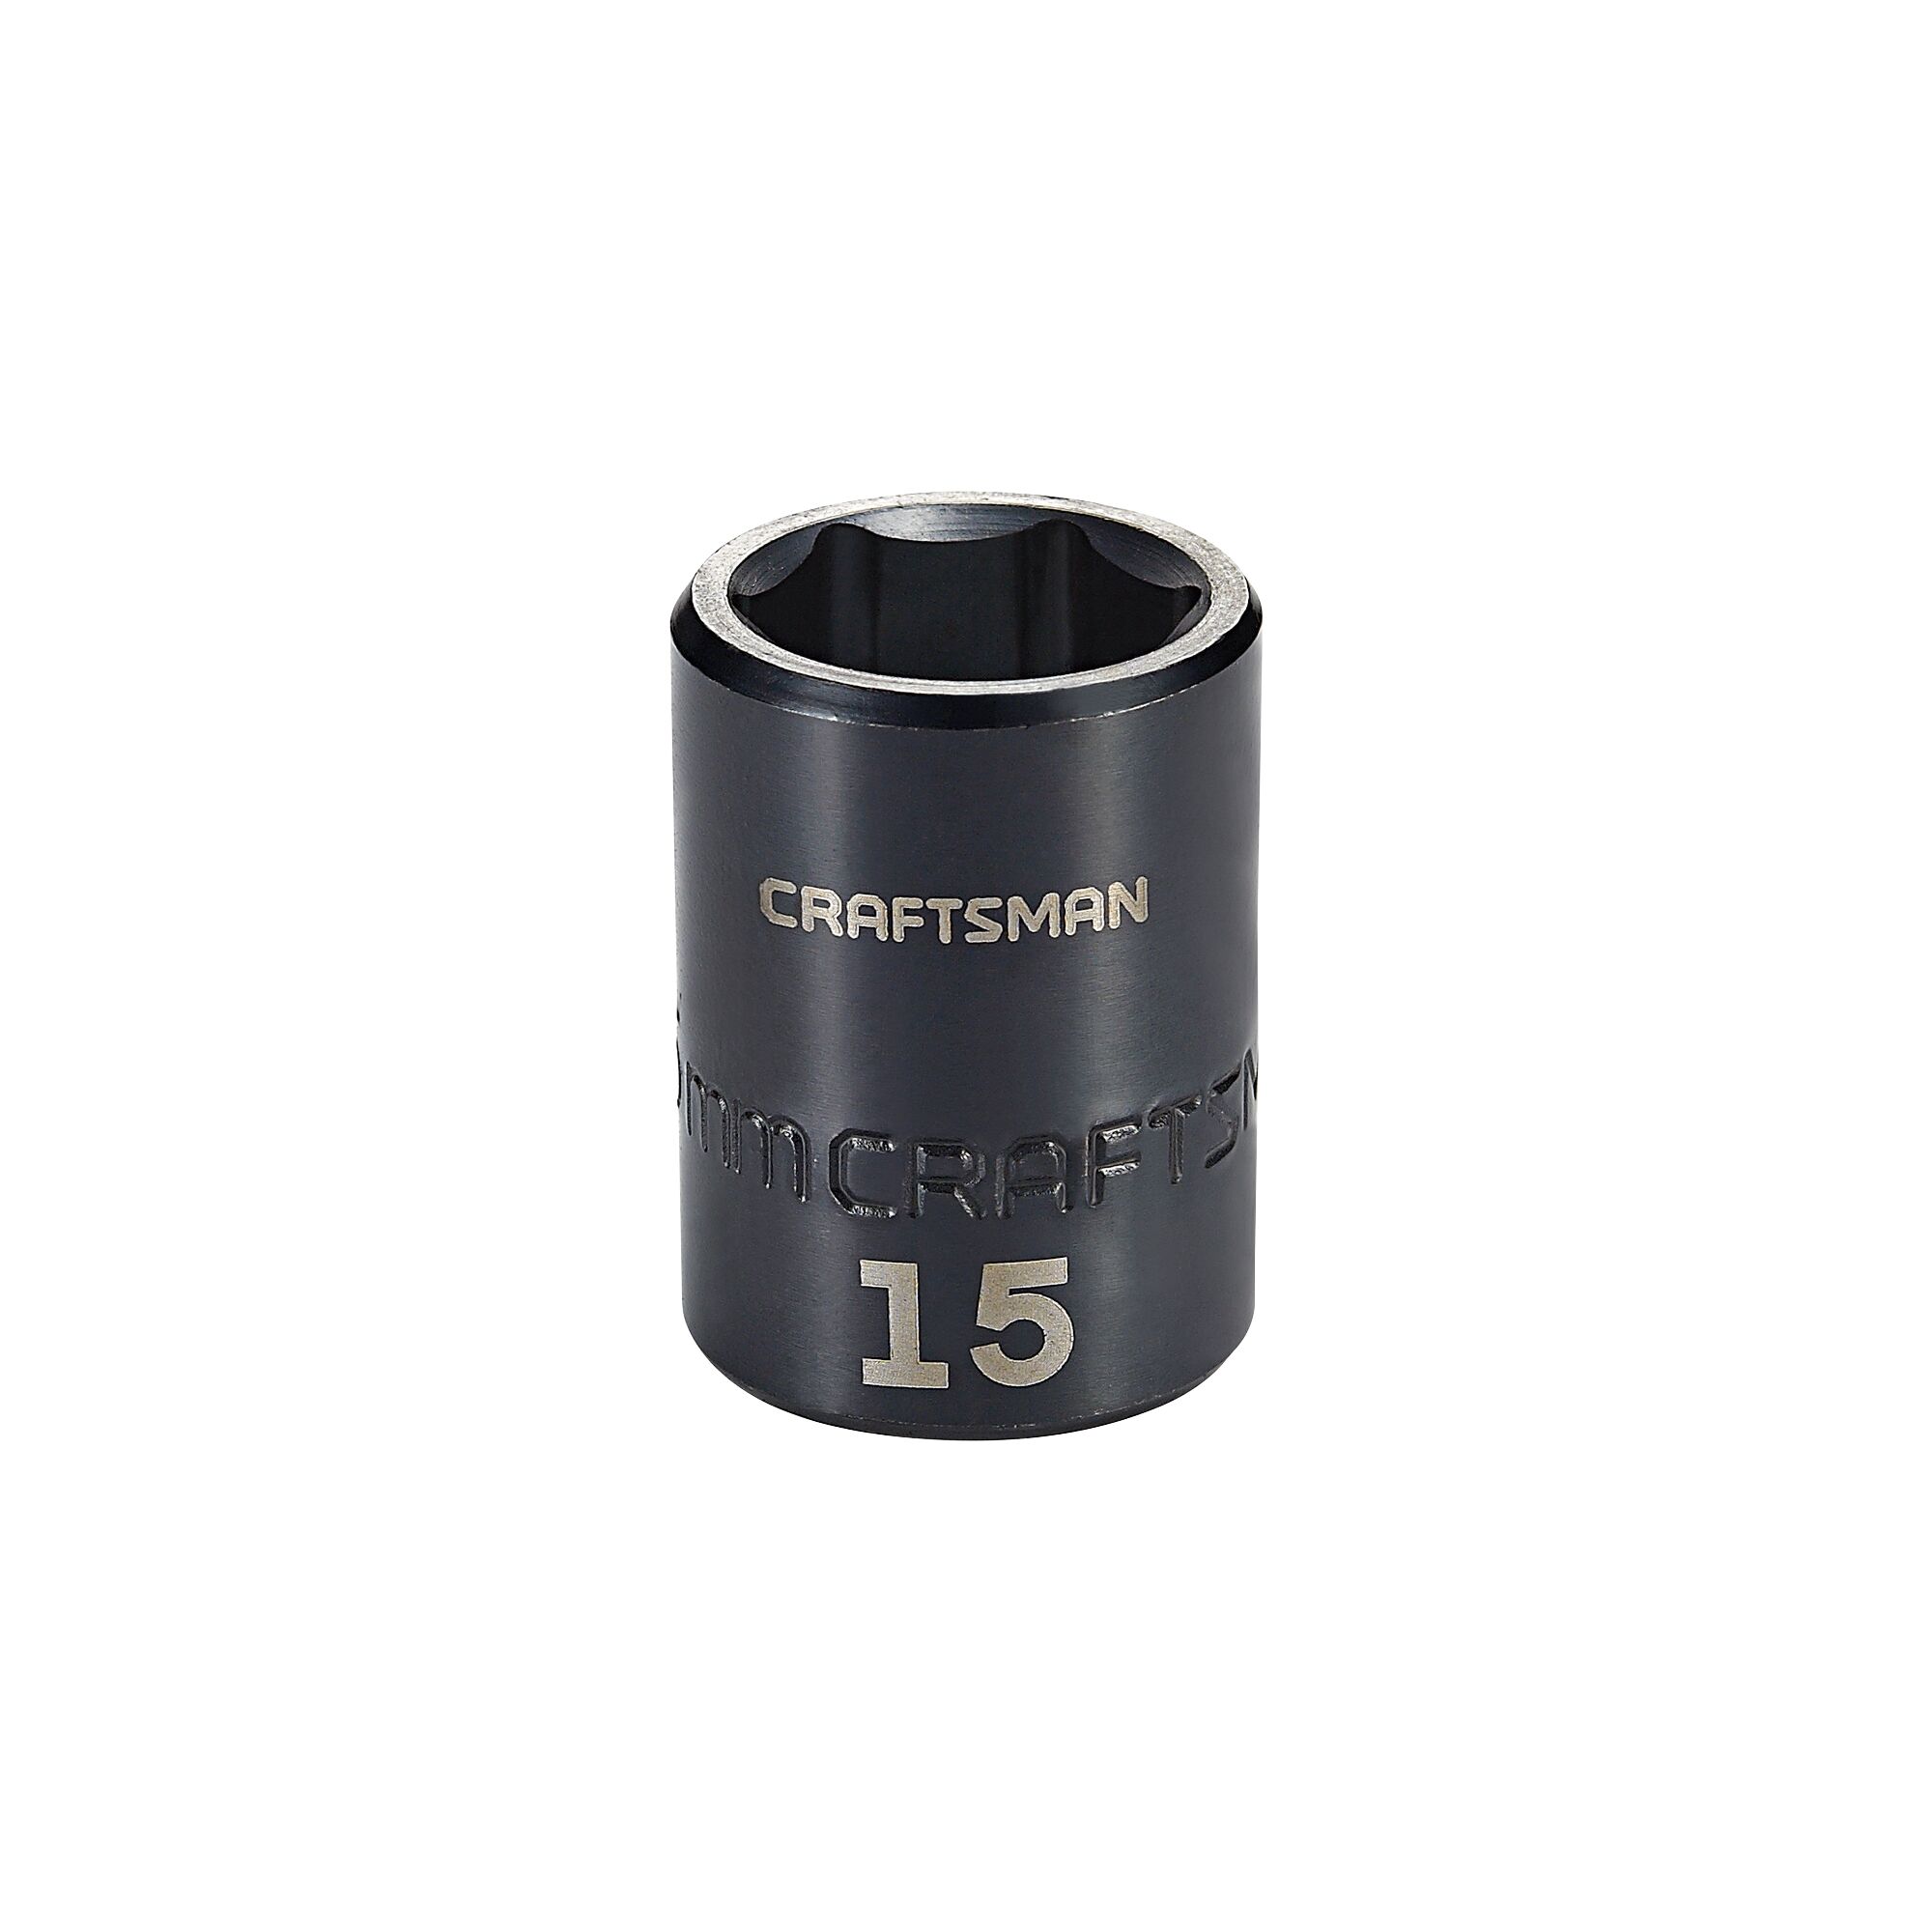 3 eighths inch 15 millimeter metric impact shallow socket.